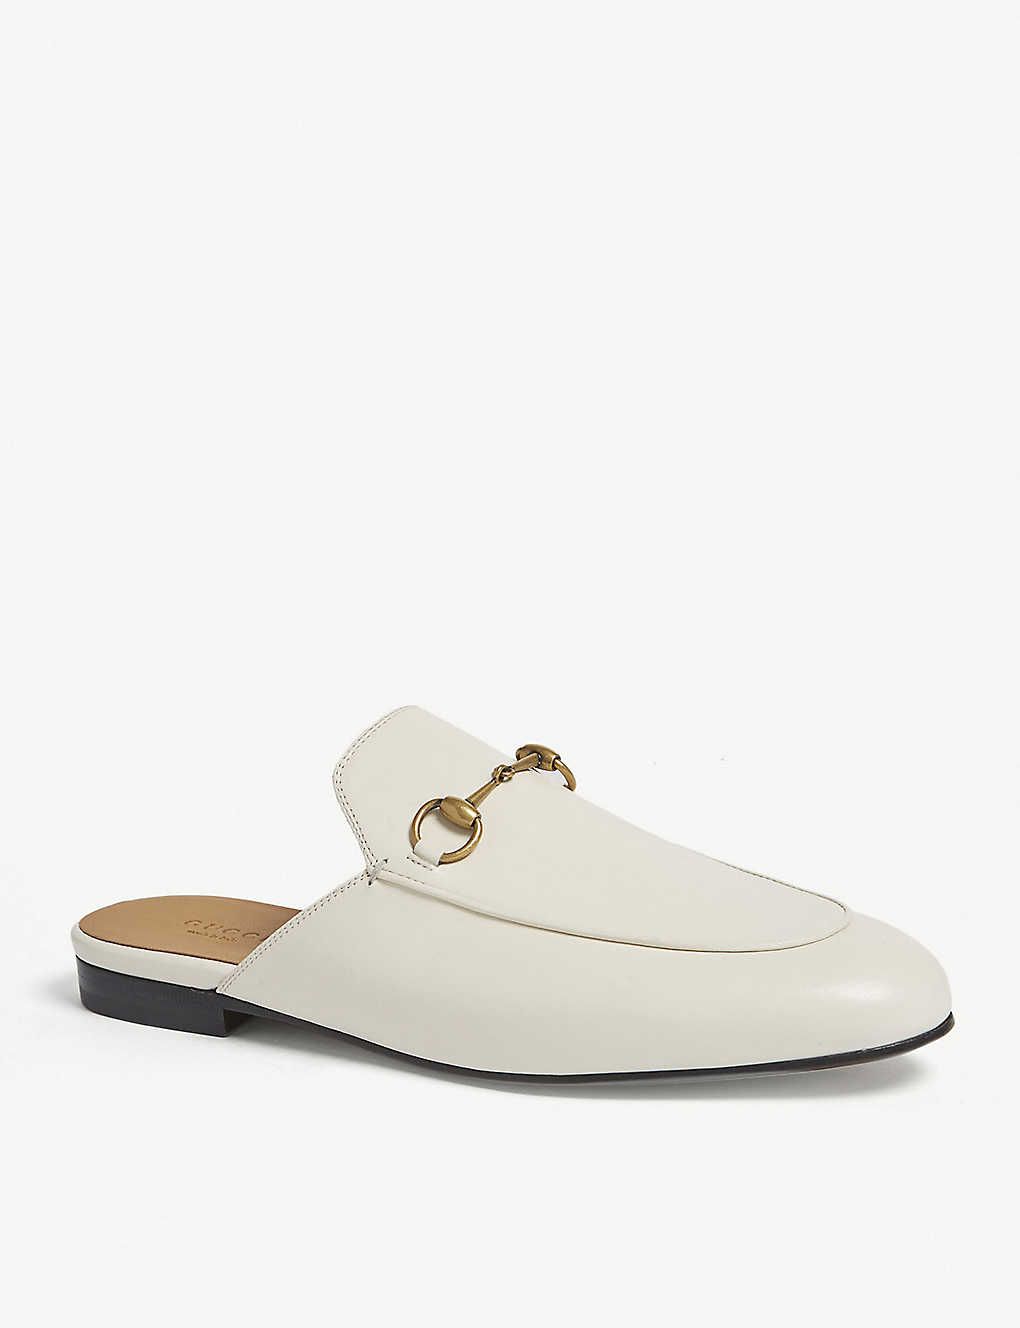 GUCCI Princetown leather slippers | Selfridges